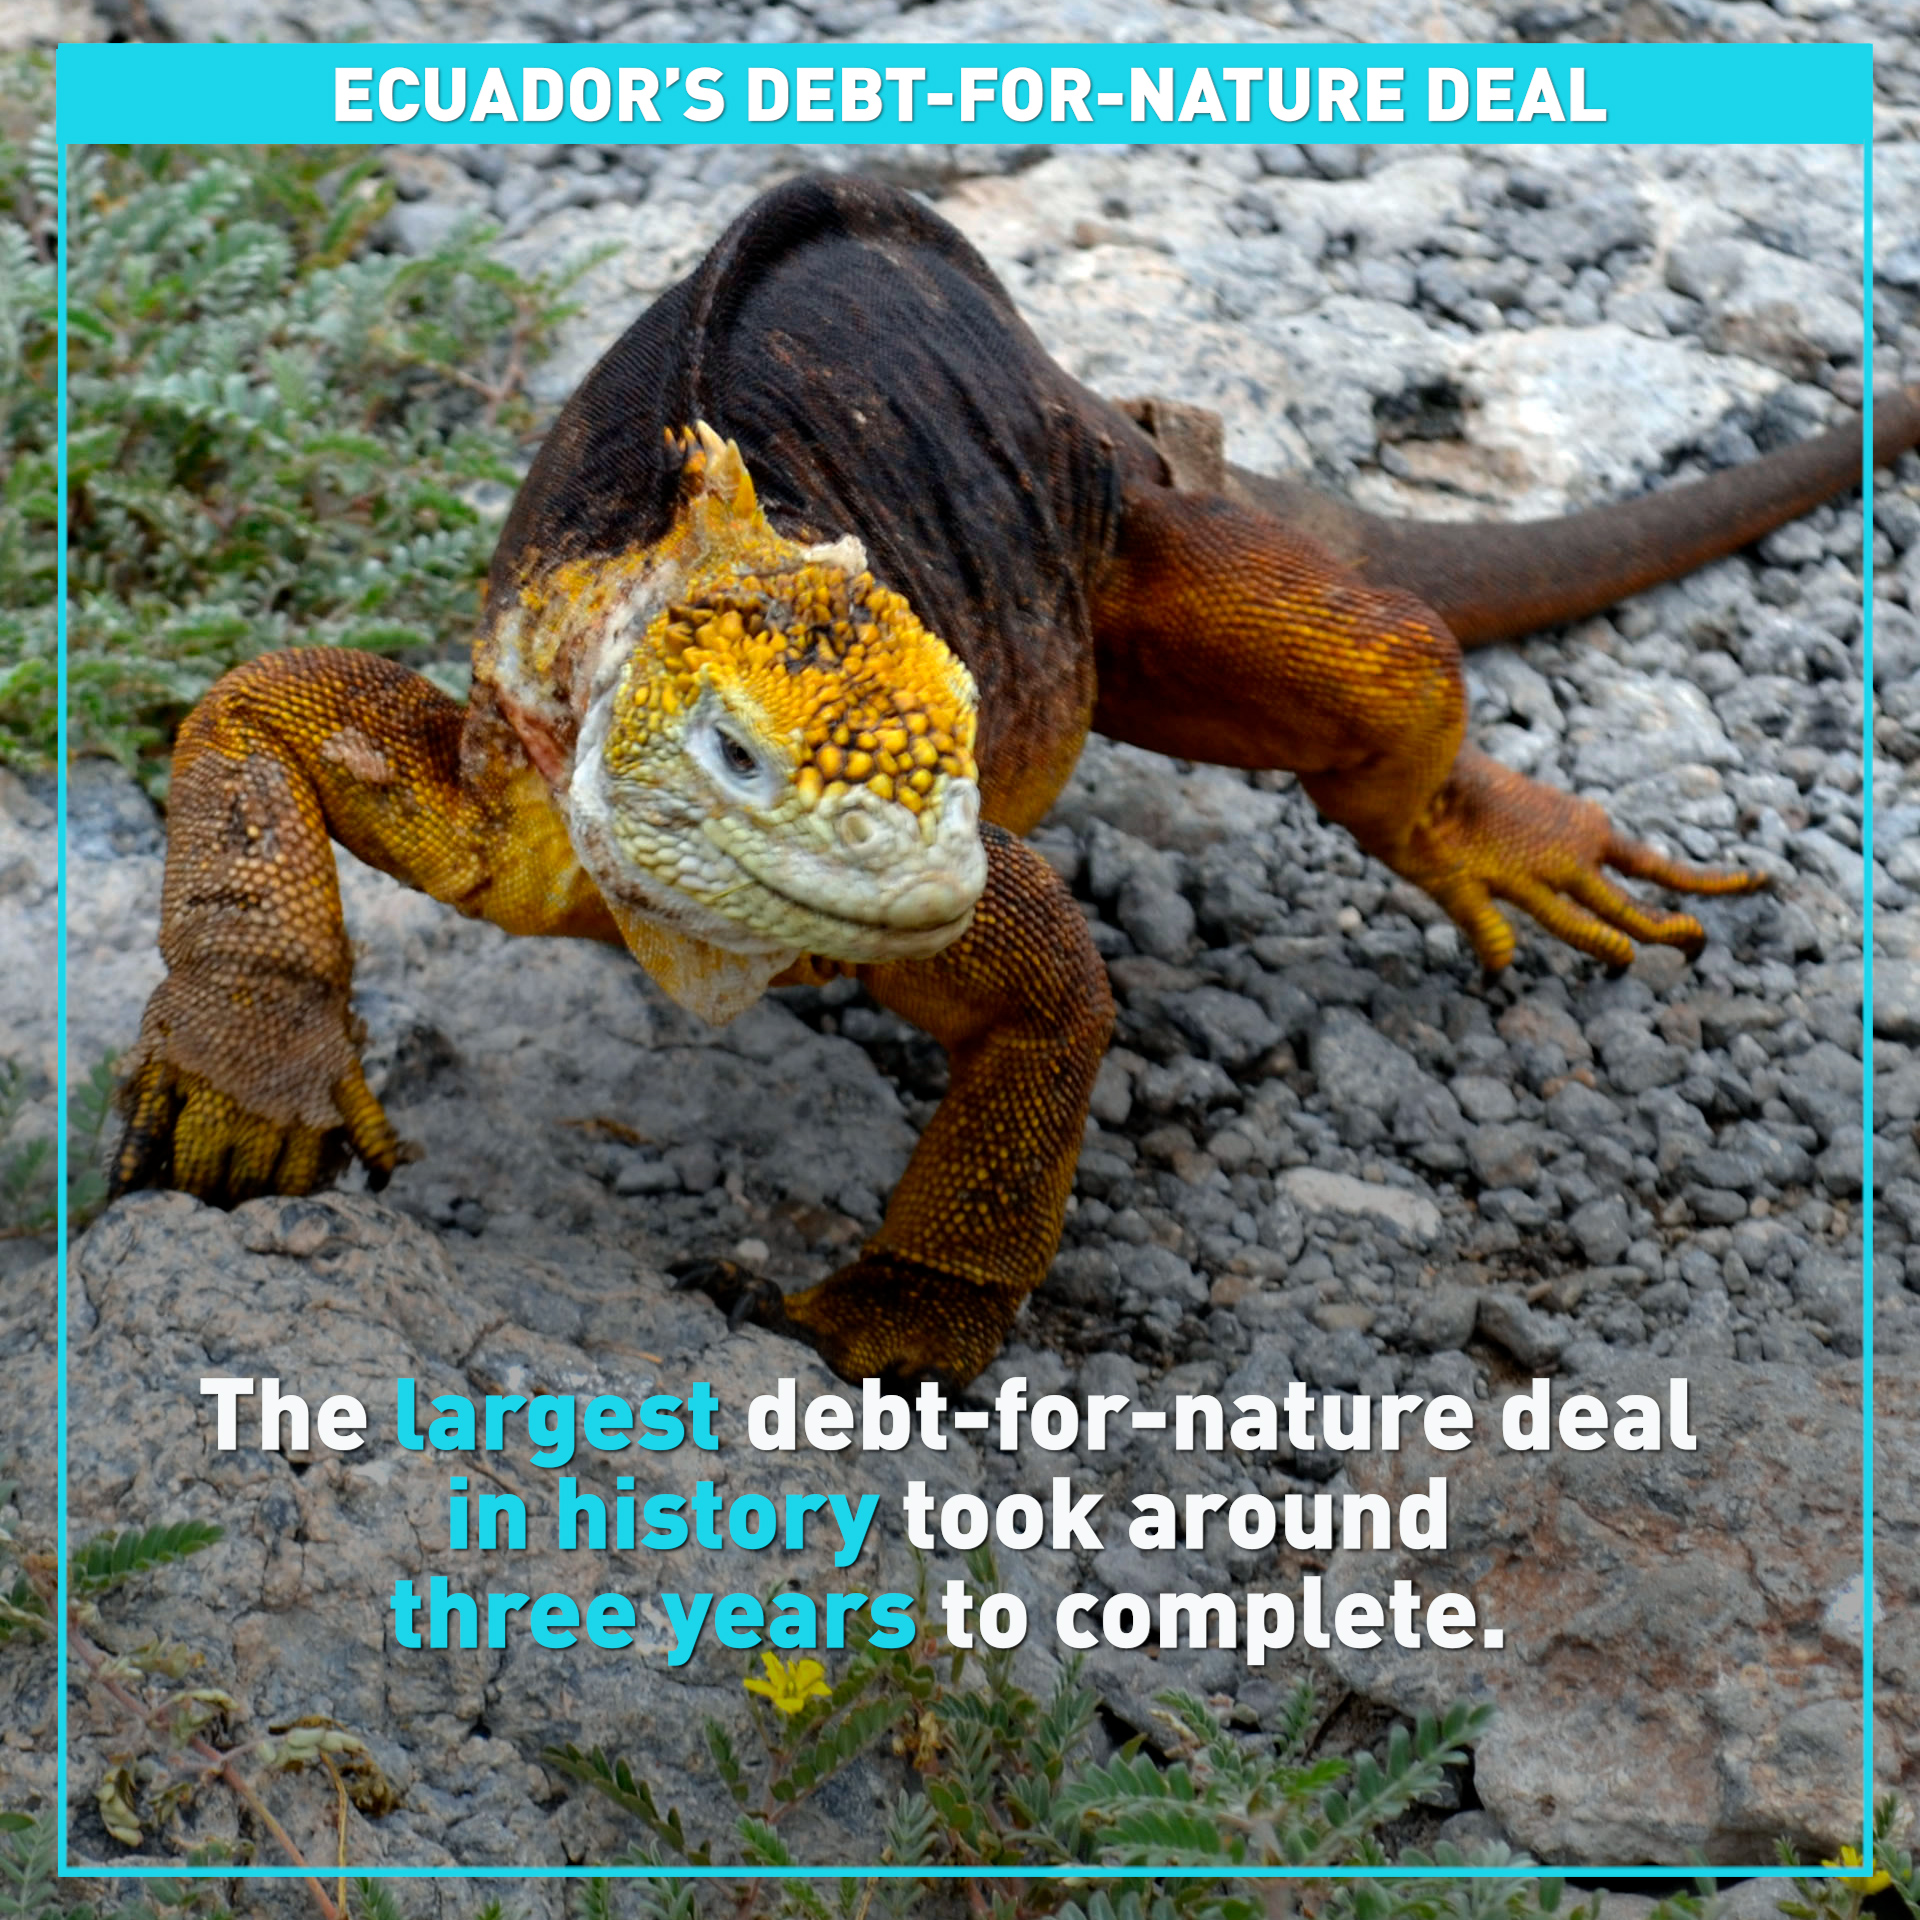 Ecuador gets creative protecting Galápagos with largest ever debt-for-nature deal